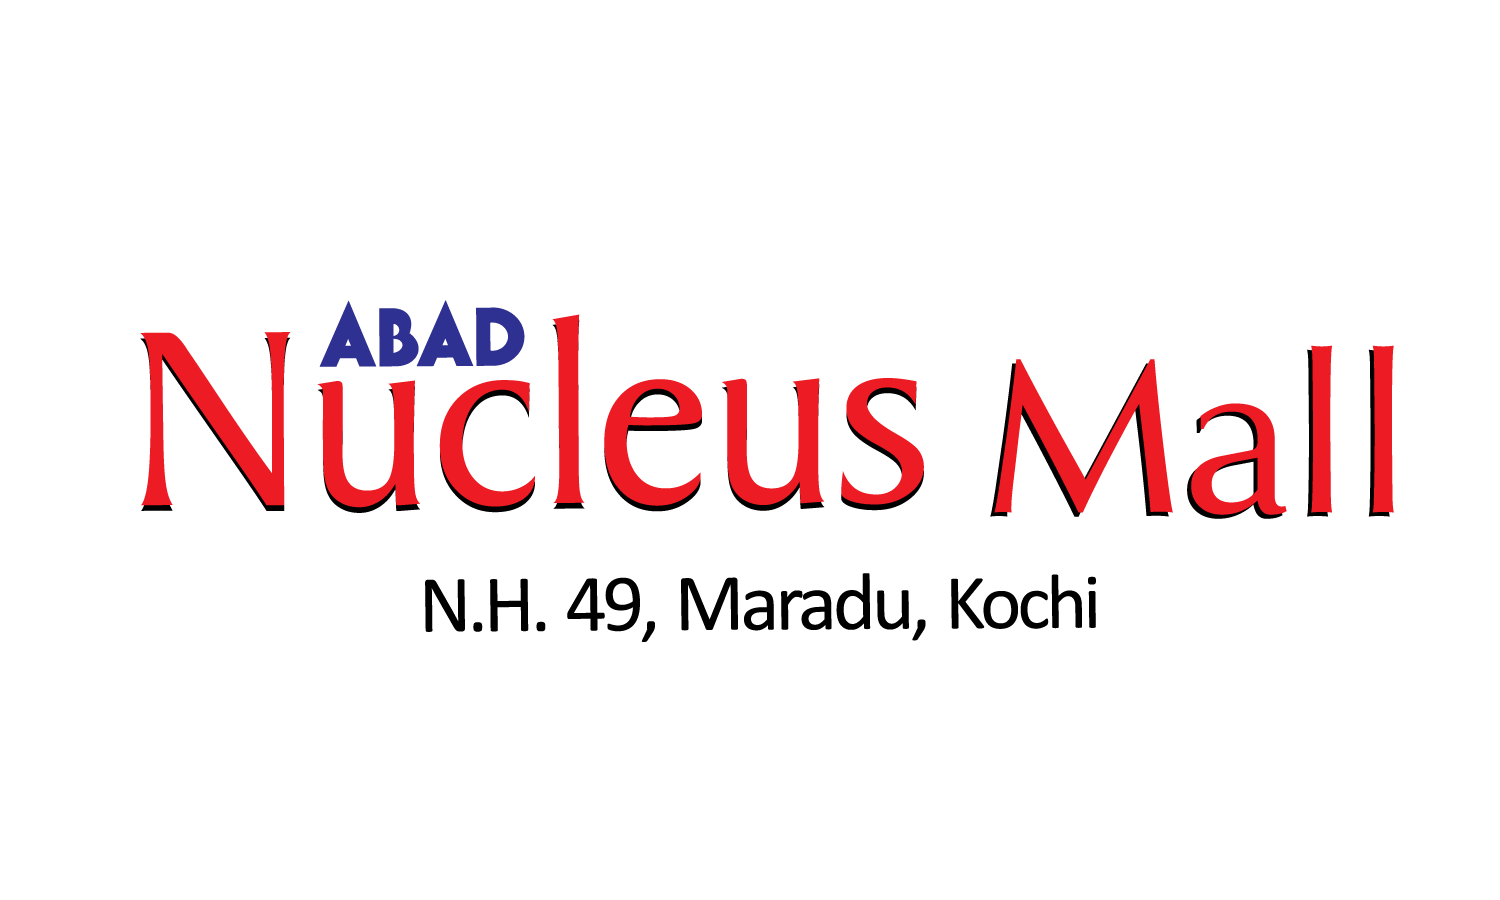 ABAD Nucleus Mall|Store|Shopping